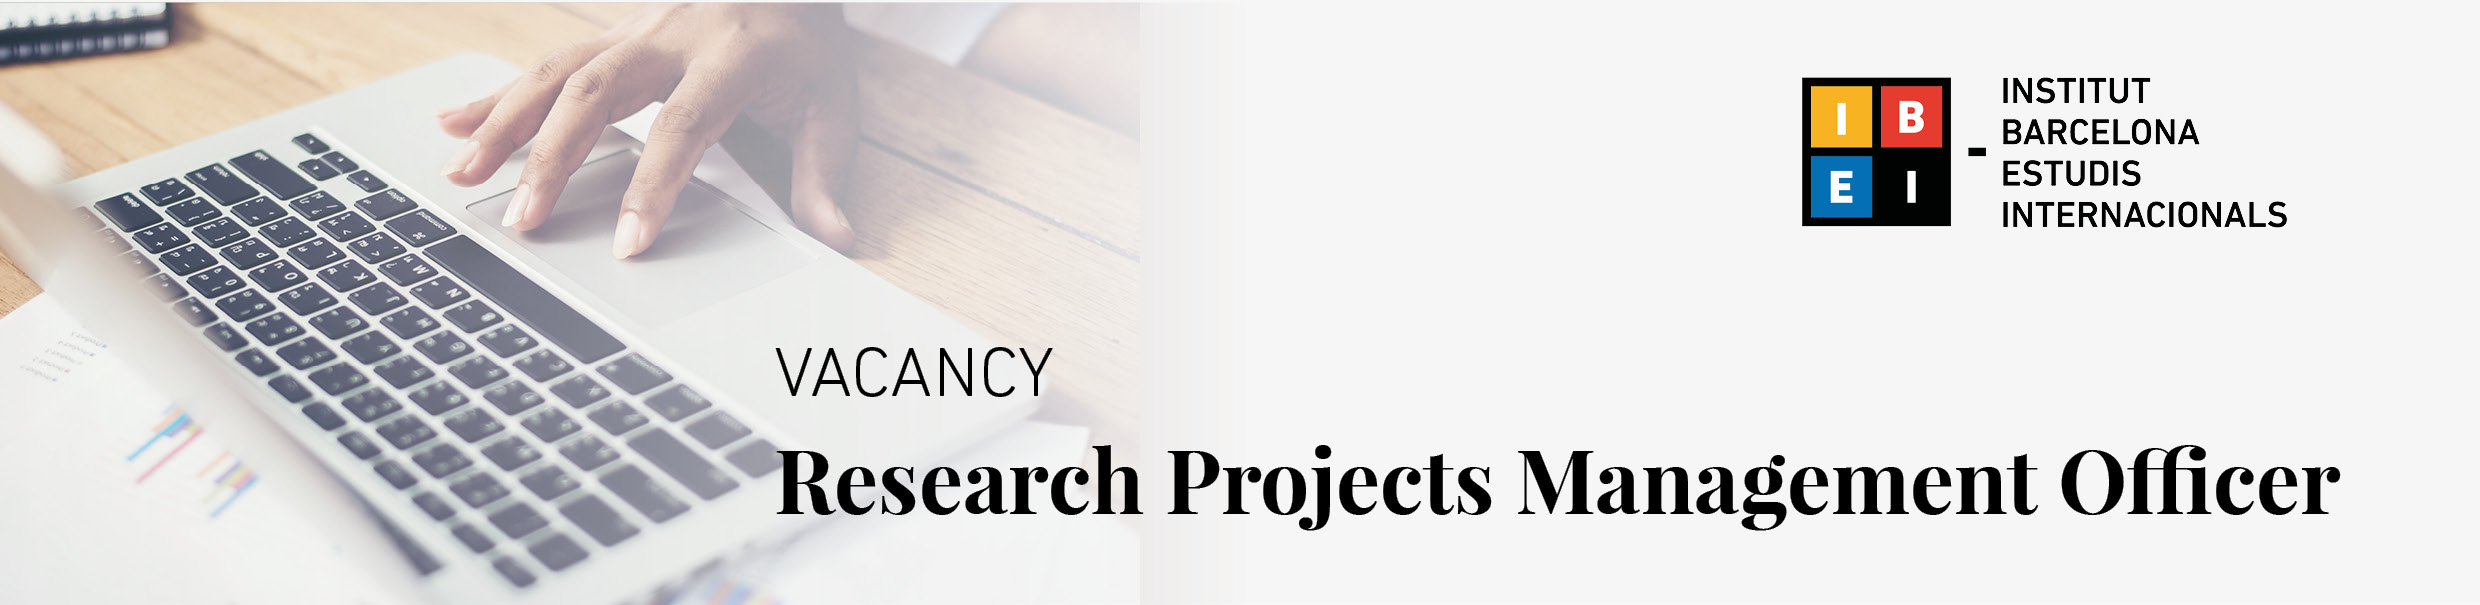 Vacancy | Research Projects Management Officer